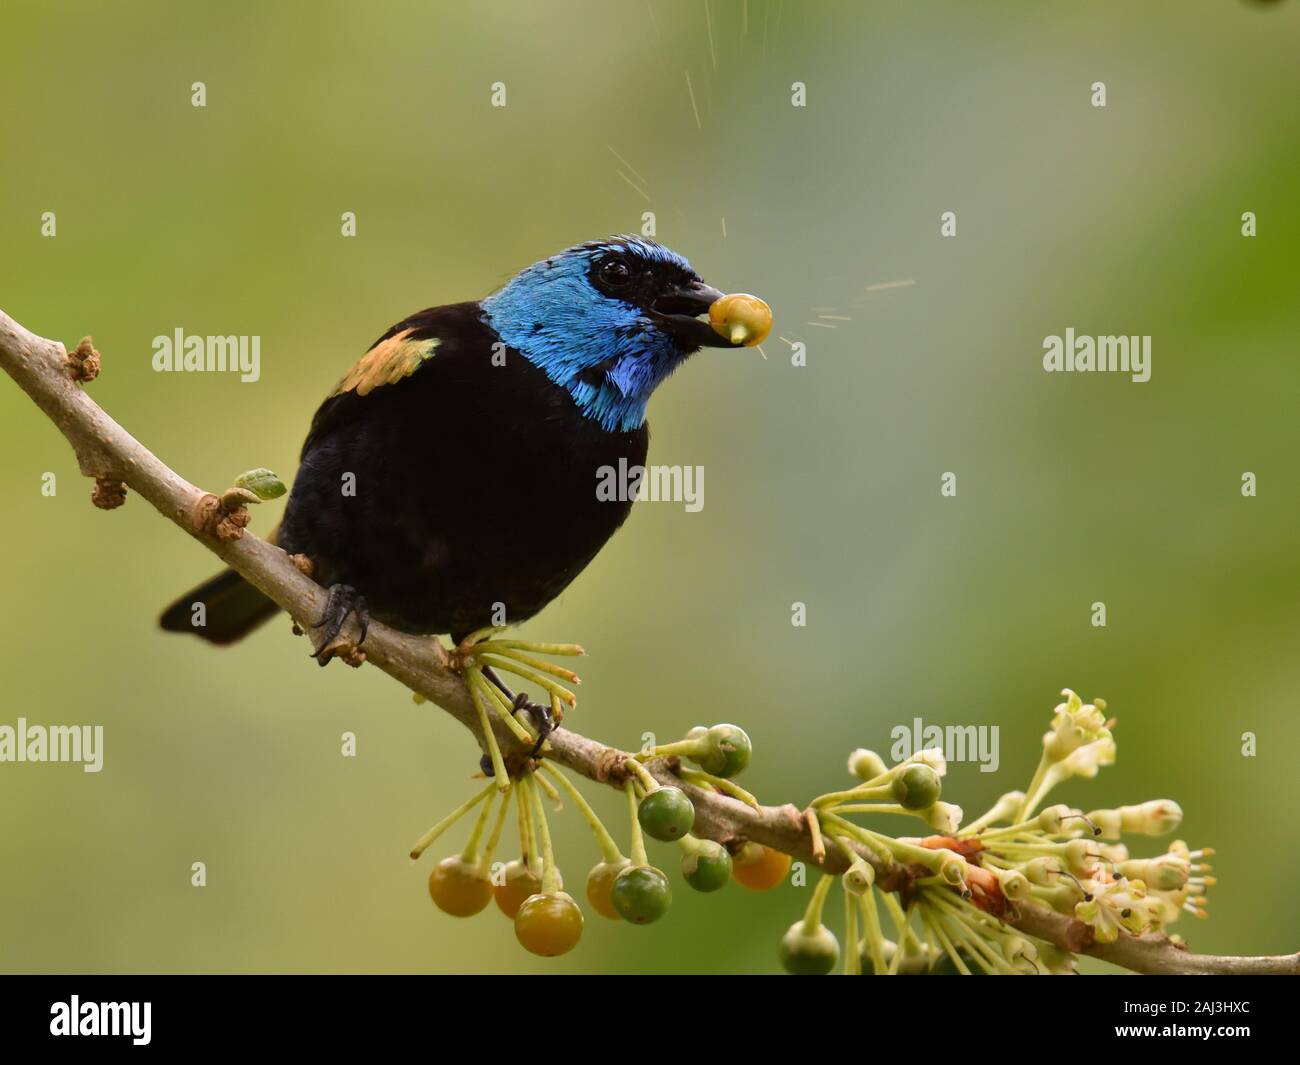 A Blue-Necked Tanager eating a Barries in amazon rainforest Stock Photo